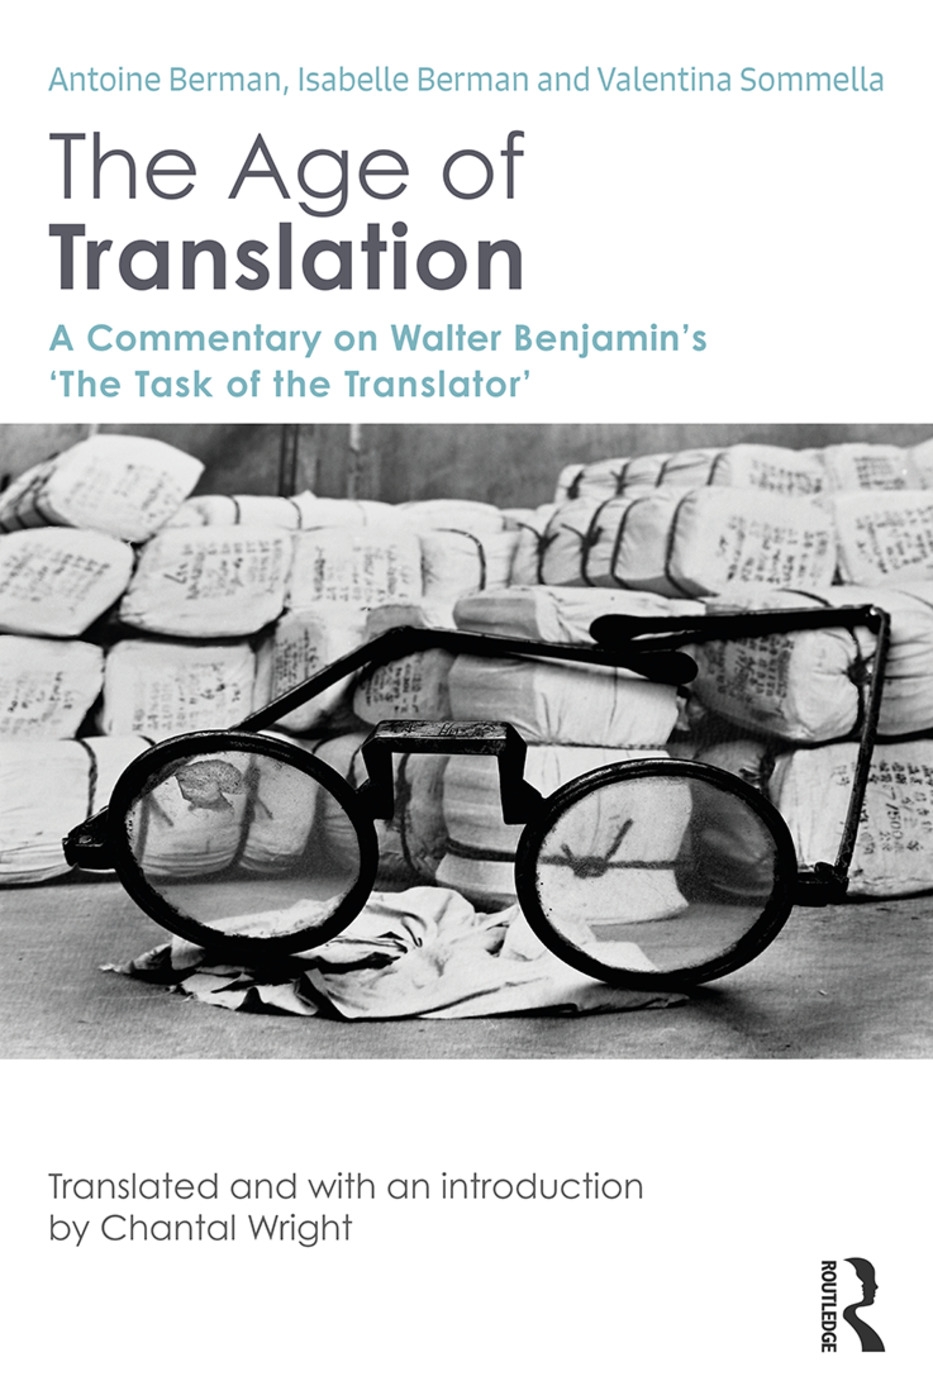 The Age of Translation: A Commentary on Walter Benjamin’s ‘the Task of the Translator’